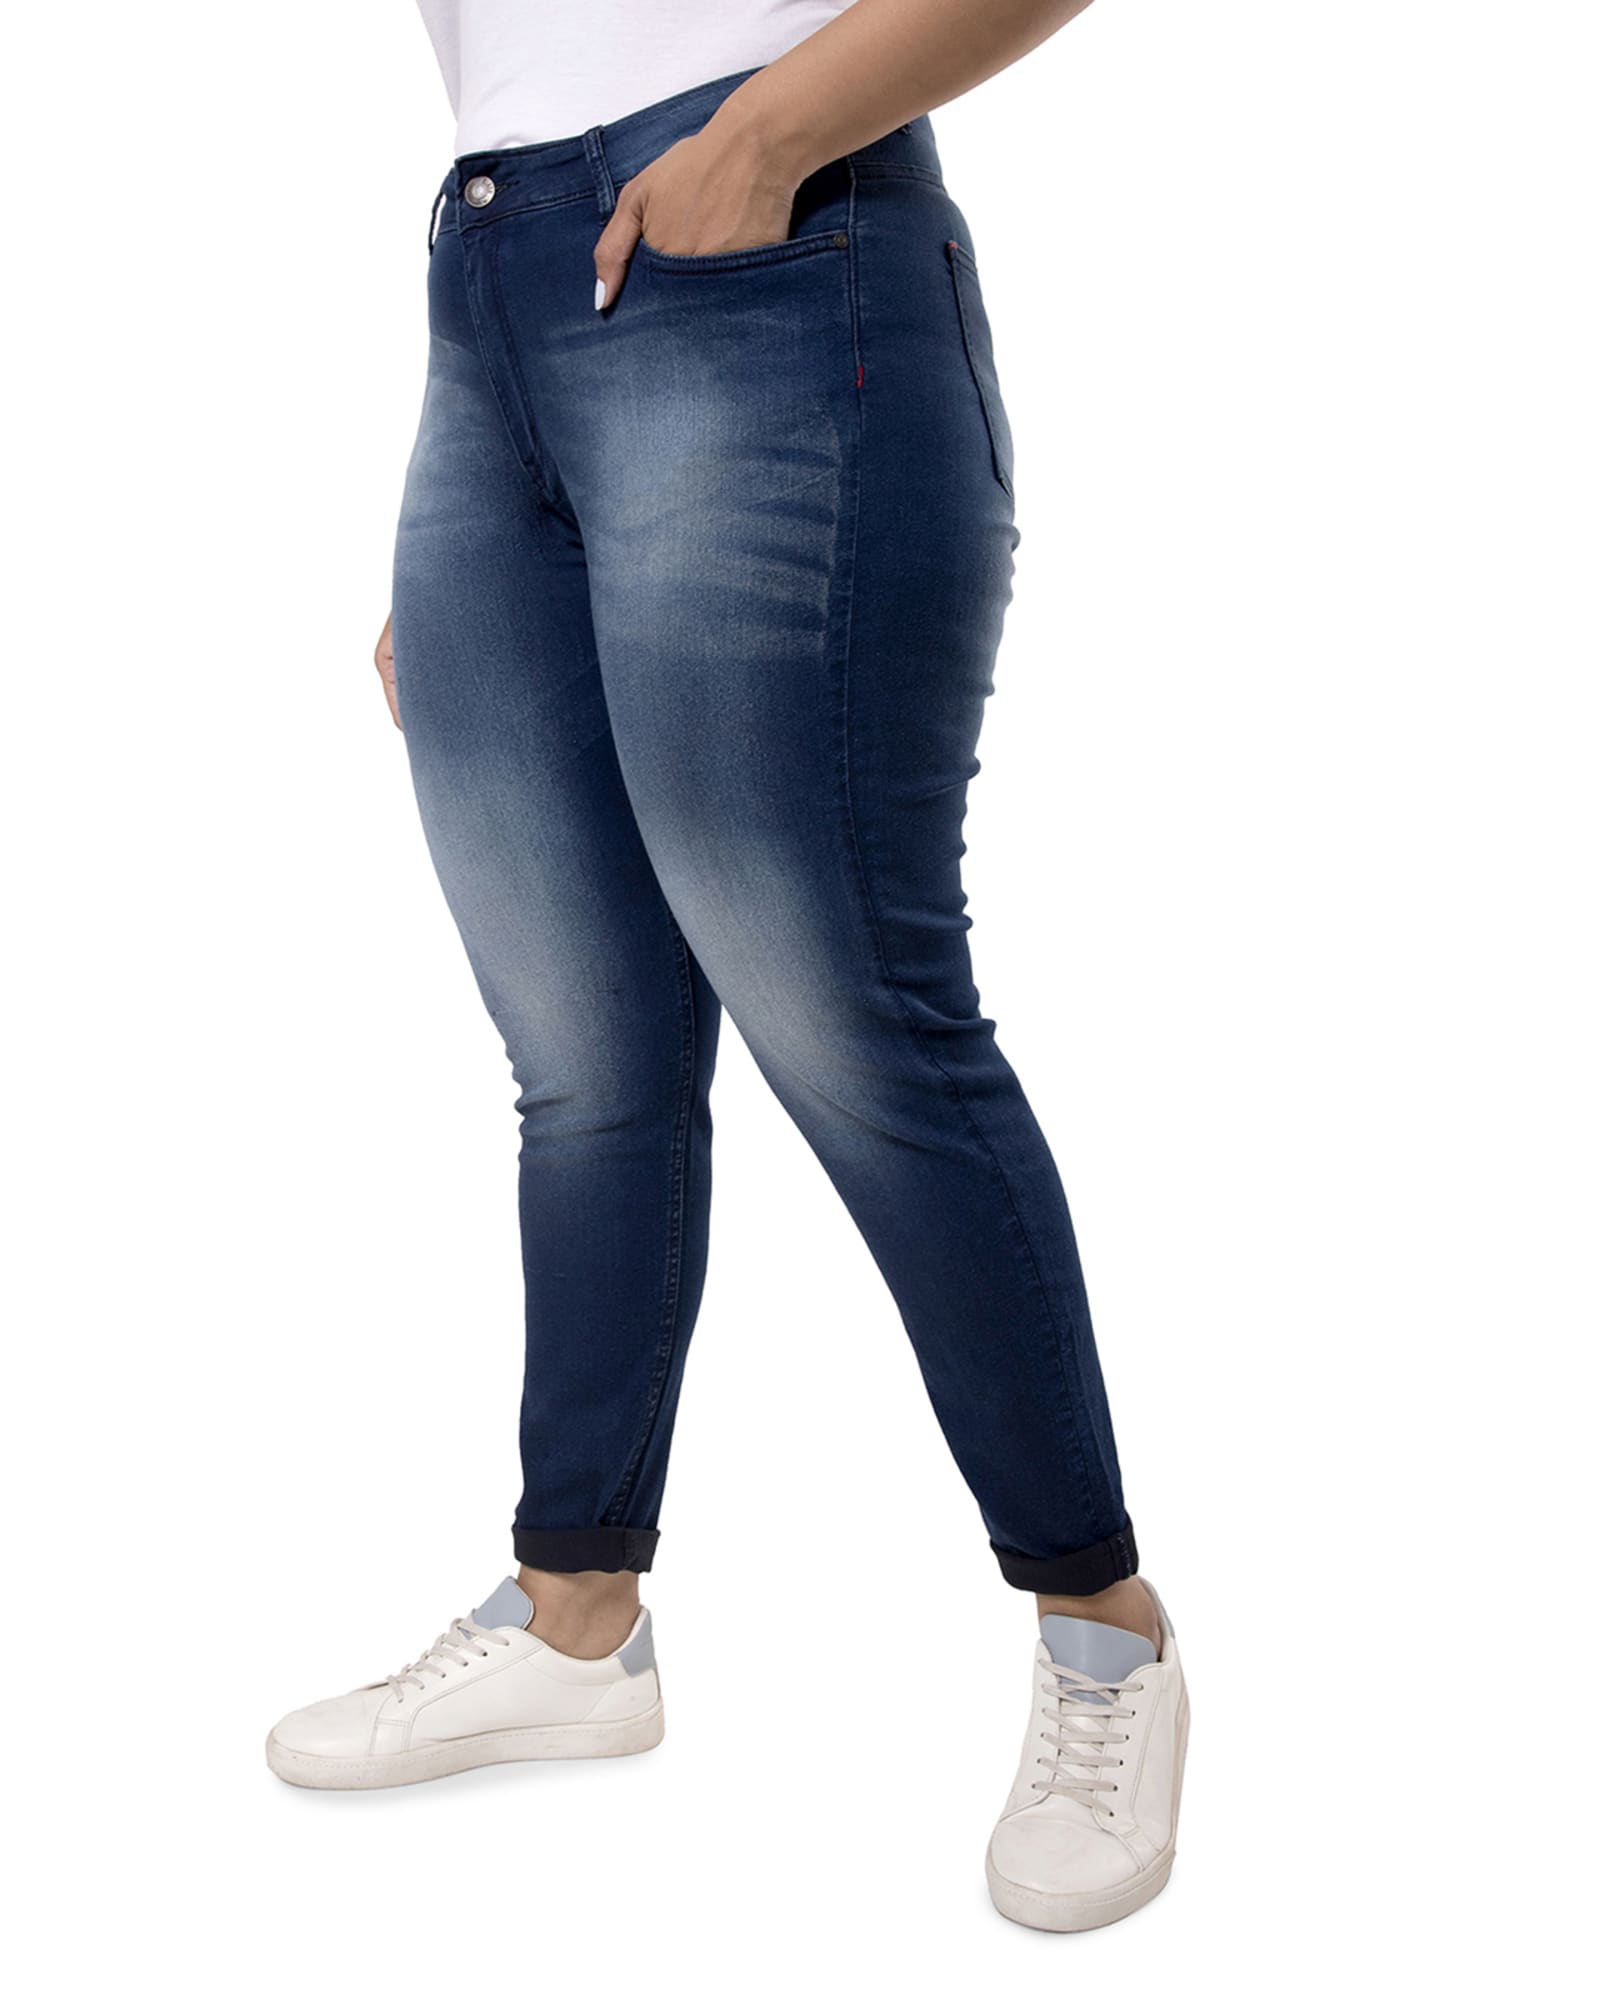 PLUS SIZE WOMEN SHADED CASUAL NAVY BLUE JEANS | Navy